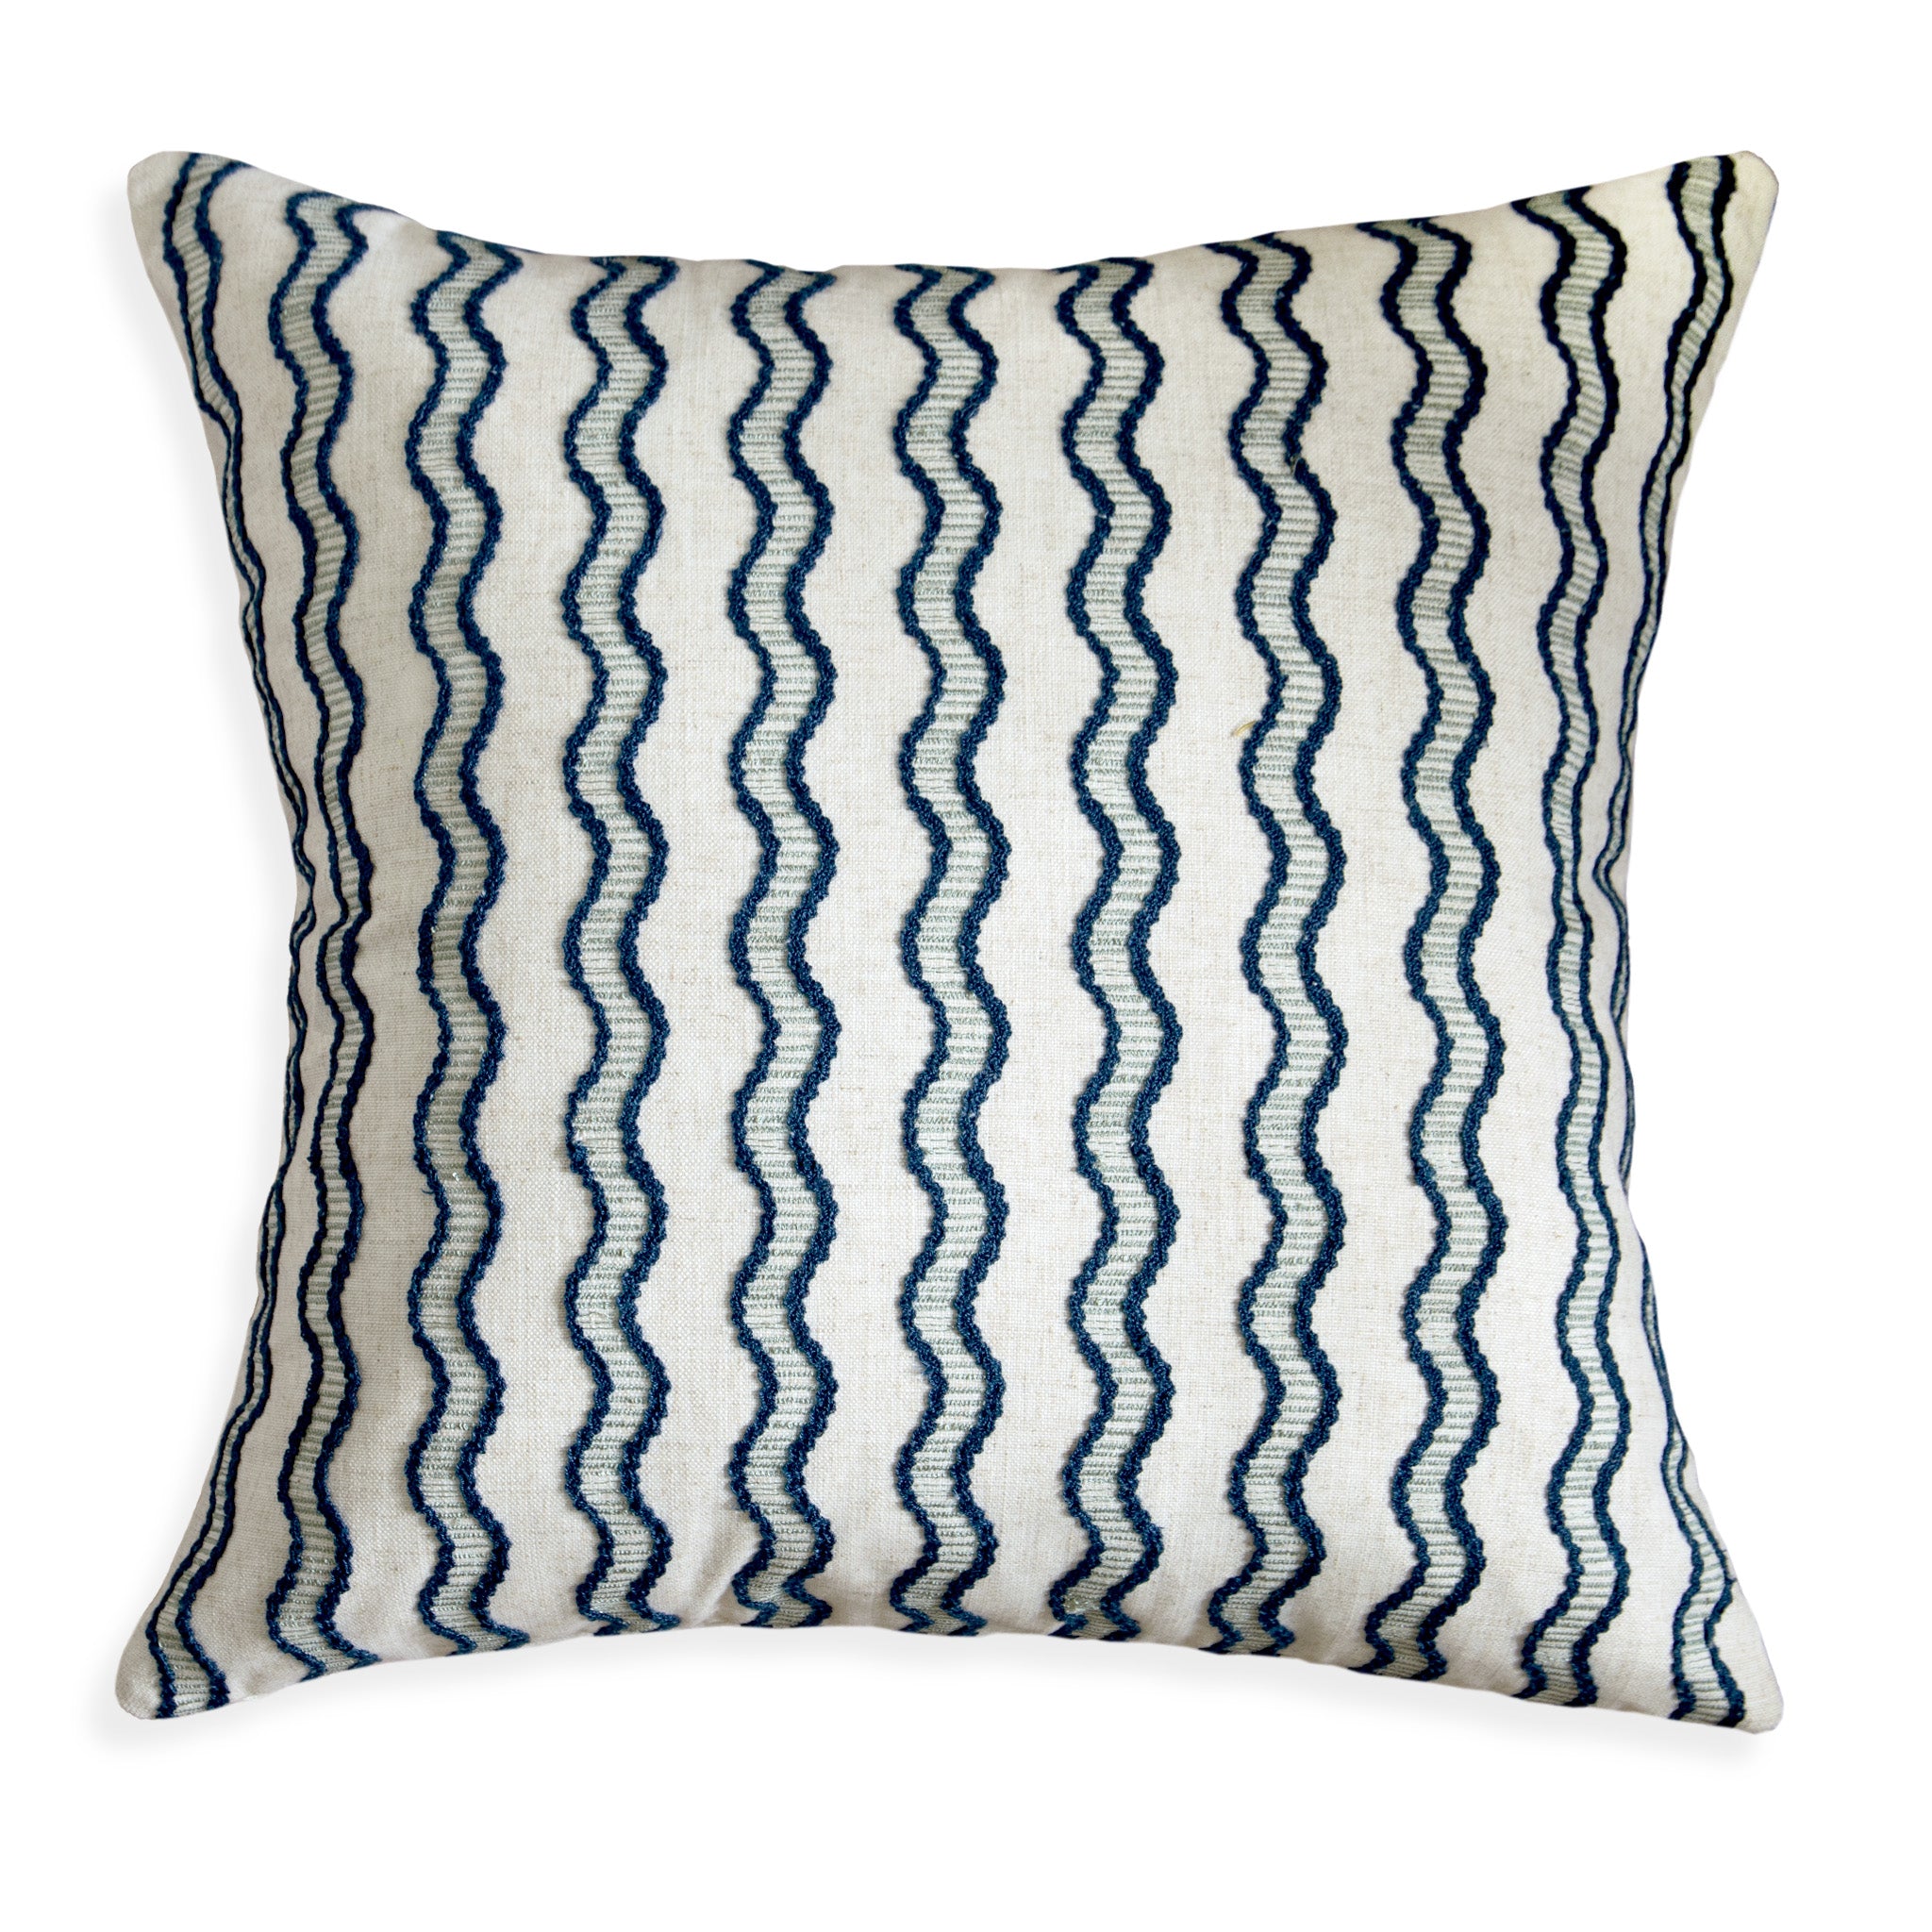 embroidered cream and navy blue wavy lines pillow